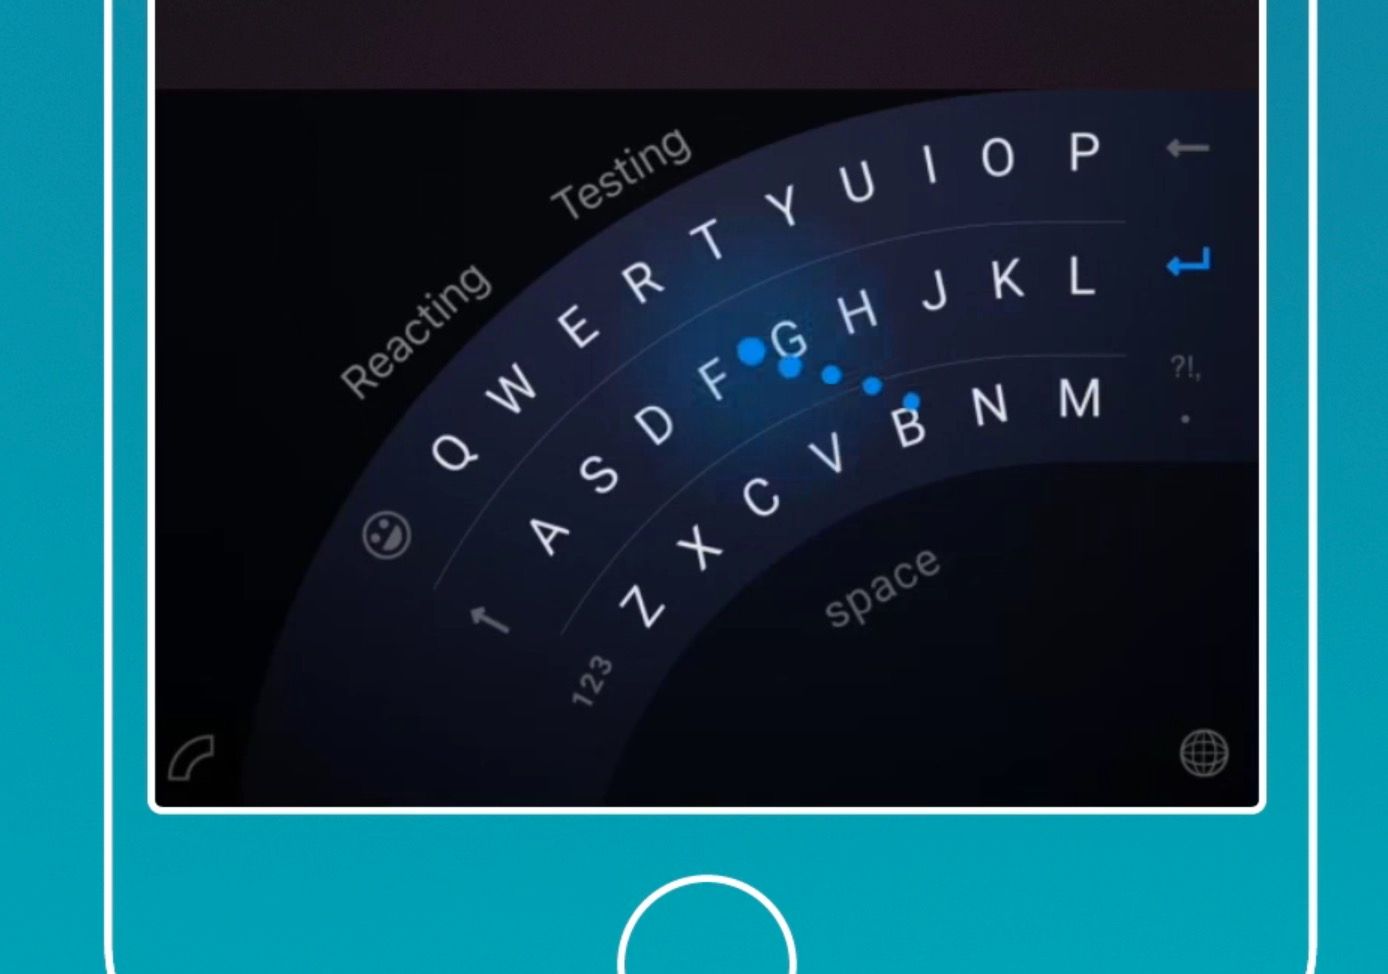 microsoft’s windows phone keyboard for iphone is now out image 1